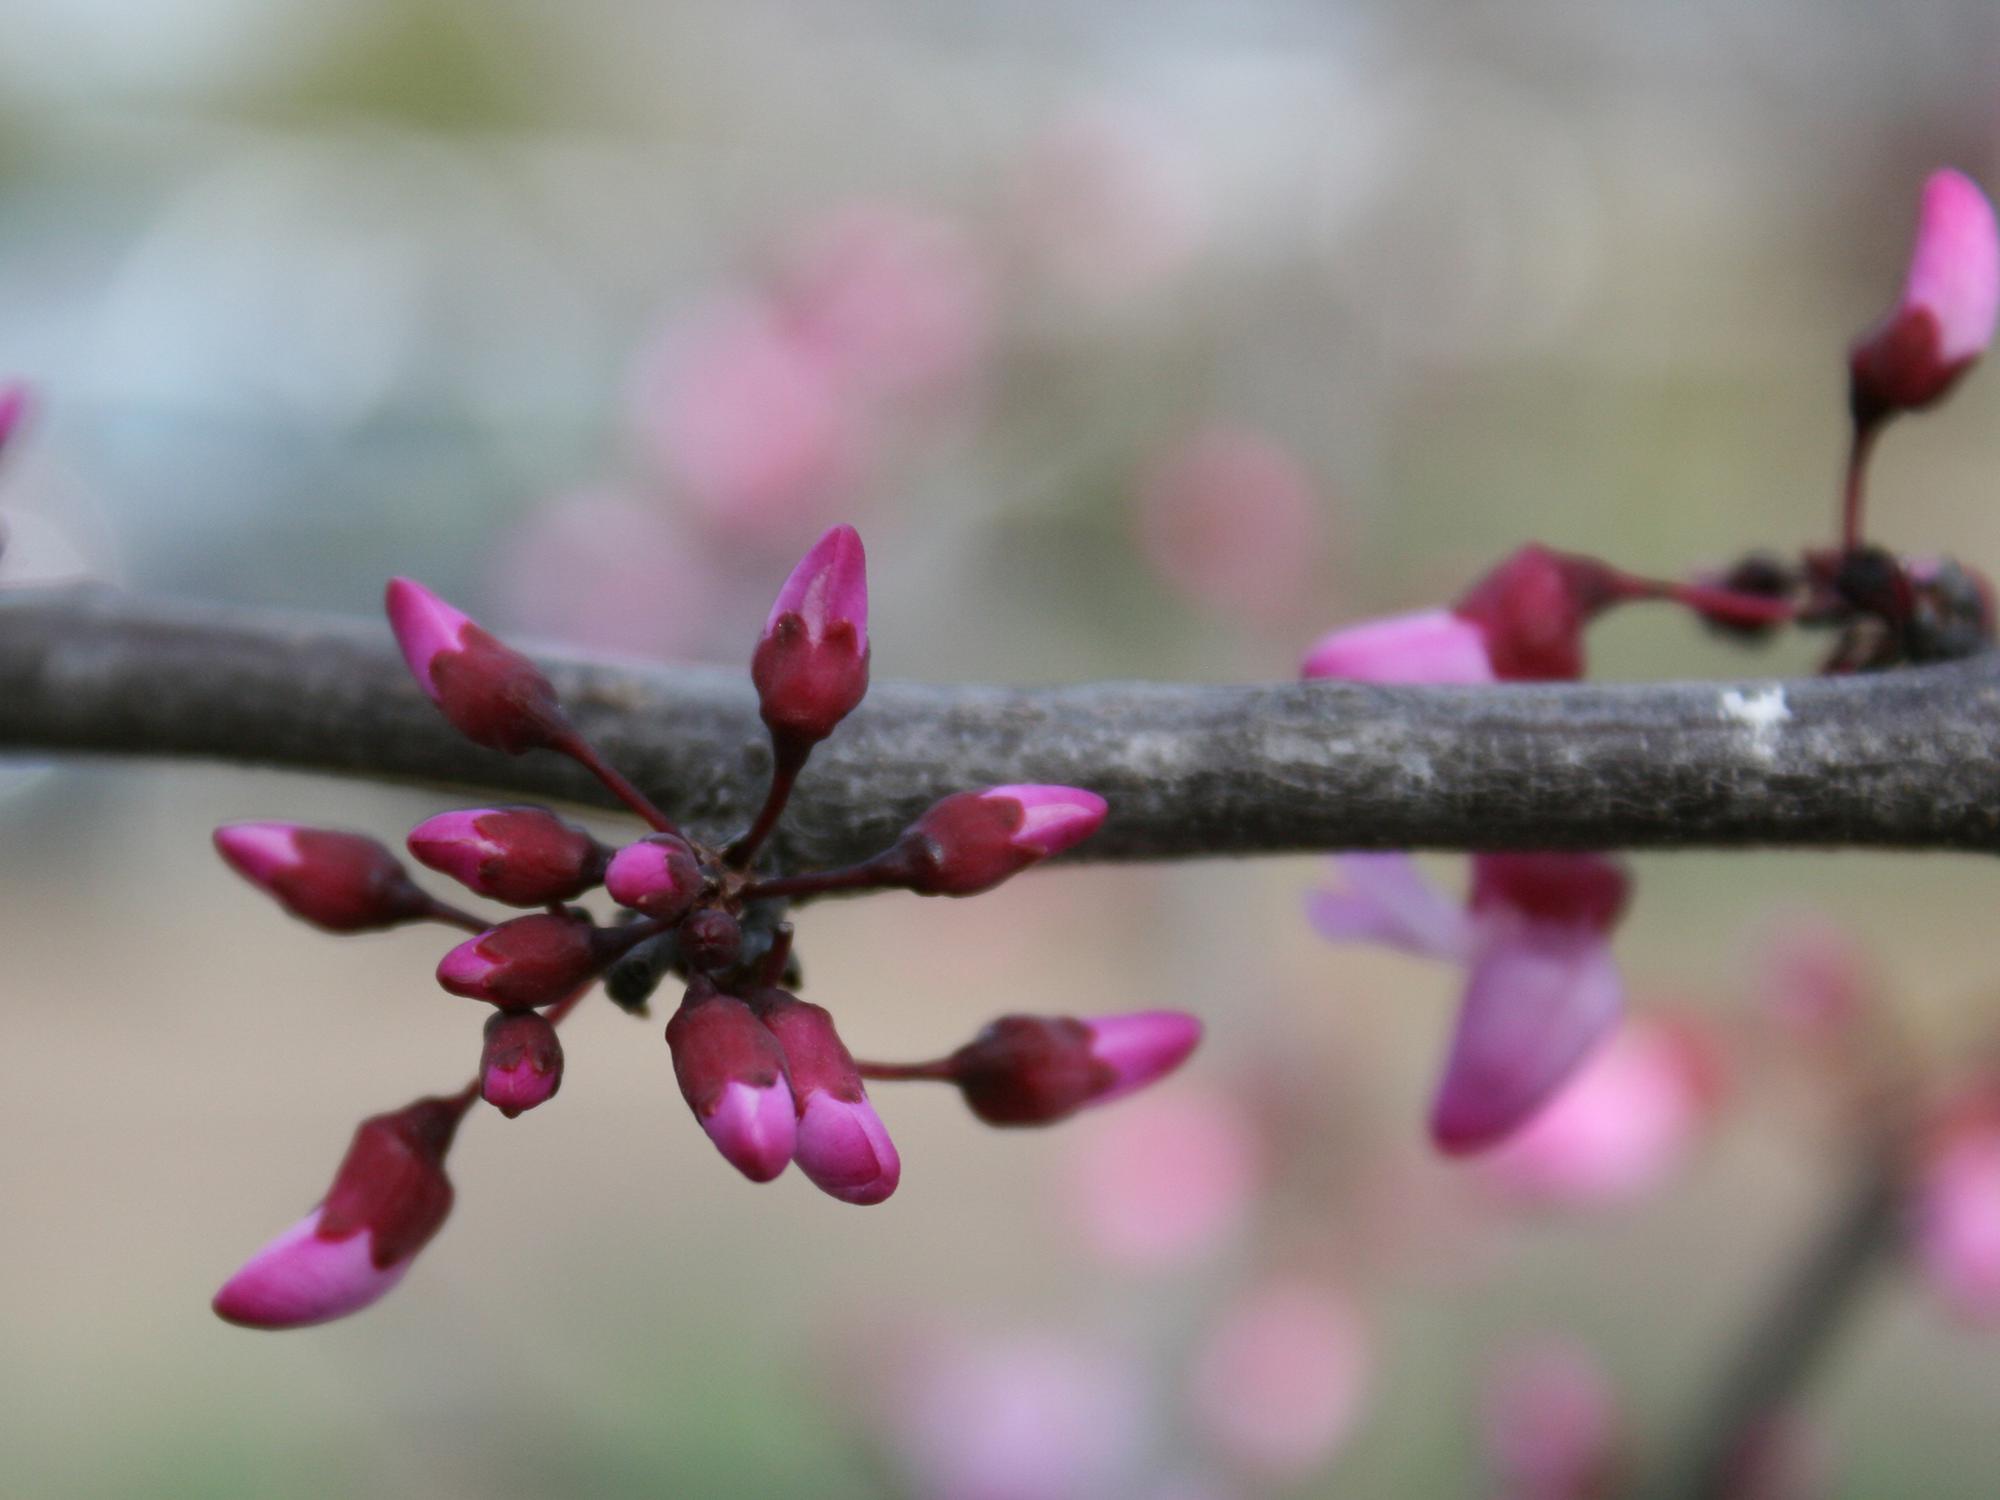 Tiny pink buds cluster in groups on a bare branch.